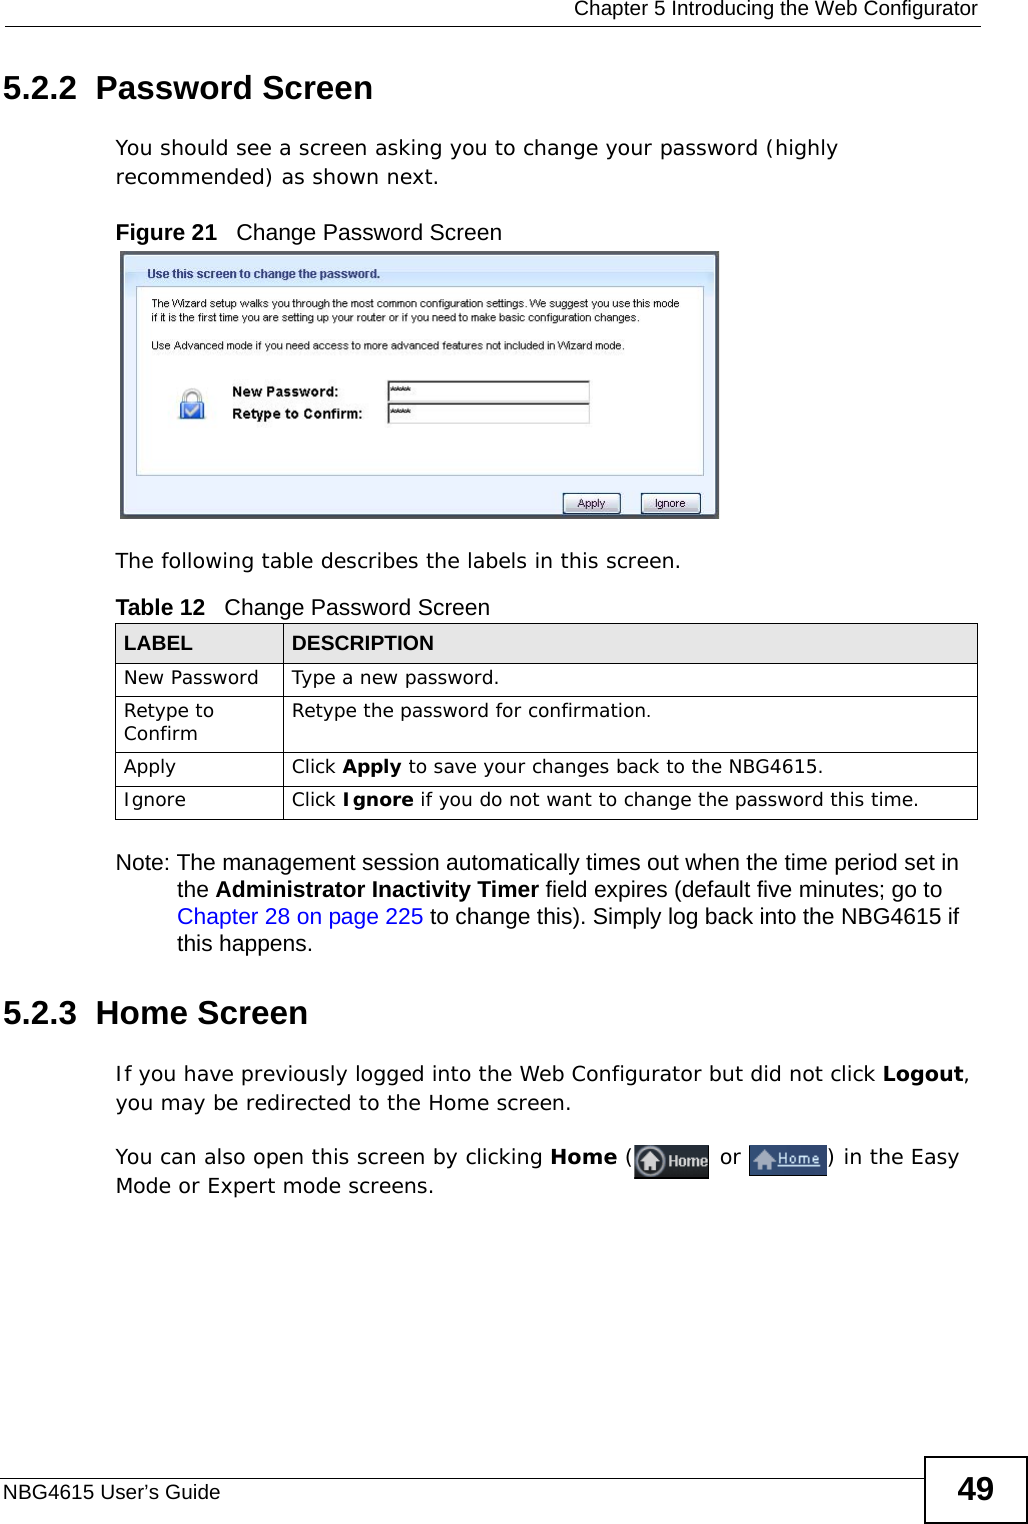  Chapter 5 Introducing the Web ConfiguratorNBG4615 User’s Guide 495.2.2  Password ScreenYou should see a screen asking you to change your password (highly recommended) as shown next. Figure 21   Change Password ScreenThe following table describes the labels in this screen.Note: The management session automatically times out when the time period set in the Administrator Inactivity Timer field expires (default five minutes; go to Chapter 28 on page 225 to change this). Simply log back into the NBG4615 if this happens.5.2.3  Home ScreenIf you have previously logged into the Web Configurator but did not click Logout, you may be redirected to the Home screen.You can also open this screen by clicking Home ( or  ) in the Easy Mode or Expert mode screens.Table 12   Change Password ScreenLABEL DESCRIPTIONNew Password Type a new password. Retype to Confirm Retype the password for confirmation.Apply Click Apply to save your changes back to the NBG4615.Ignore Click Ignore if you do not want to change the password this time.